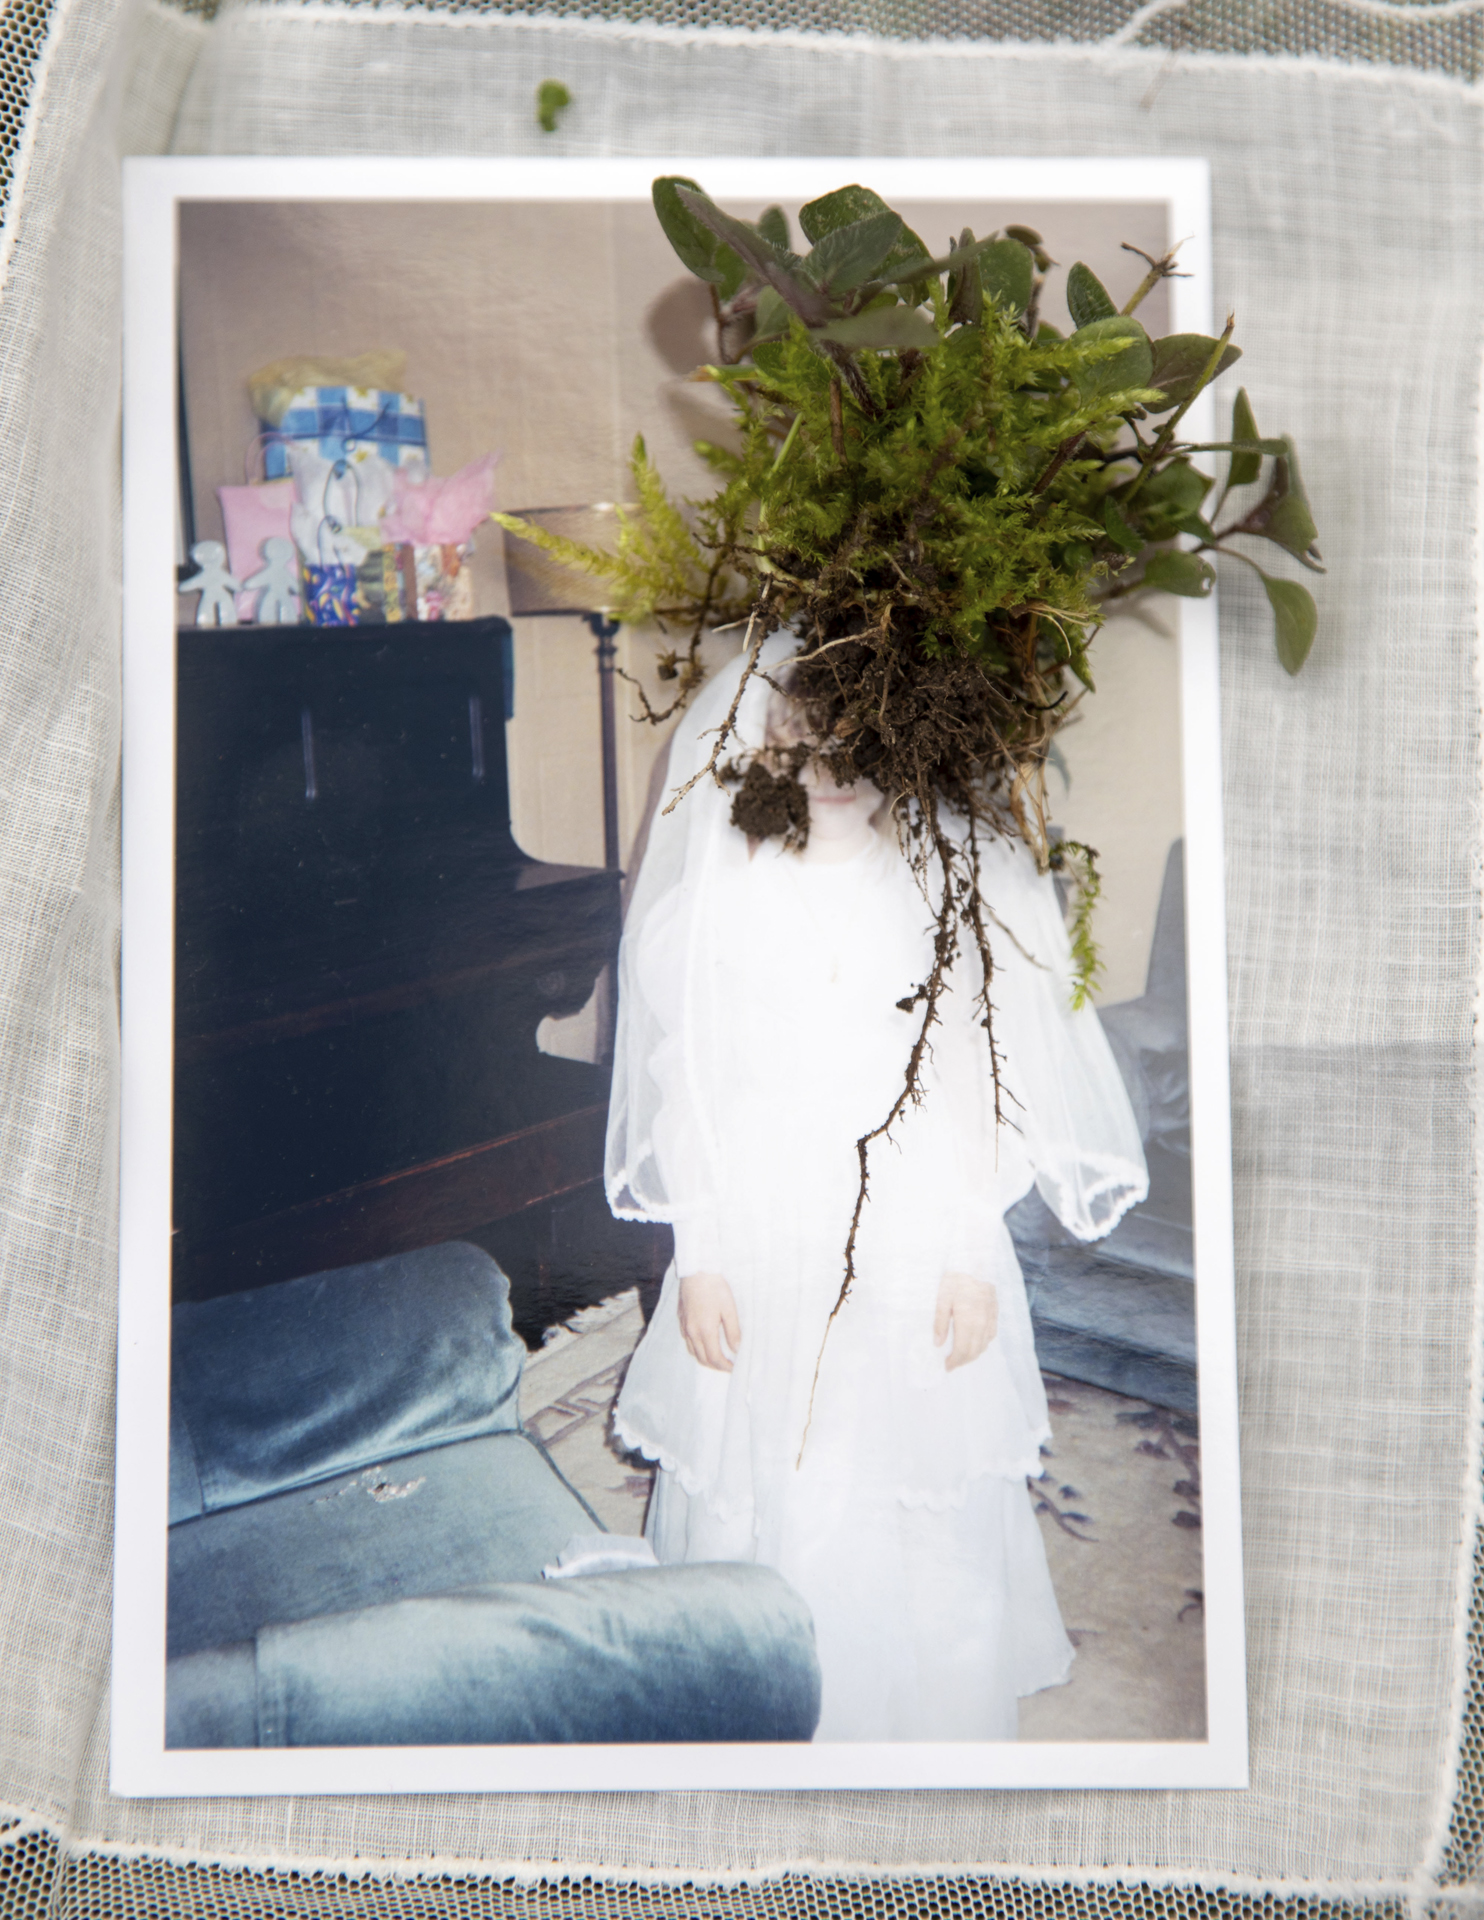 an image of a young girl in a communion dress sitting on top of a white lace doily. There is an uprooted weed placed on top of the image over the girl's face.